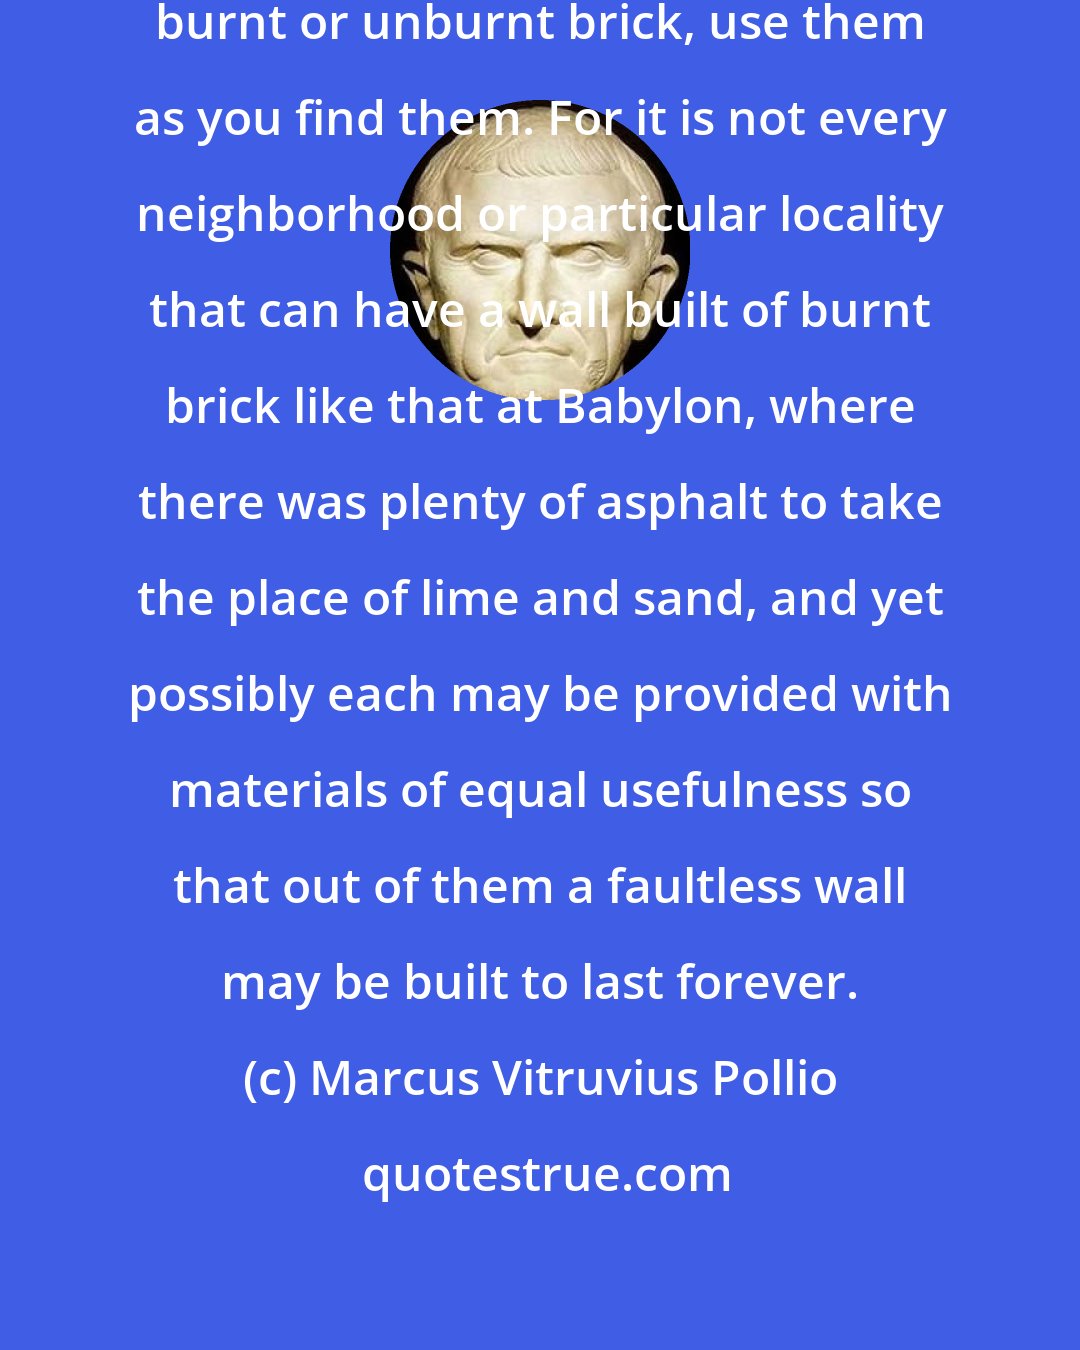 Marcus Vitruvius Pollio: Dimension stone, flint, rubble, burnt or unburnt brick, use them as you find them. For it is not every neighborhood or particular locality that can have a wall built of burnt brick like that at Babylon, where there was plenty of asphalt to take the place of lime and sand, and yet possibly each may be provided with materials of equal usefulness so that out of them a faultless wall may be built to last forever.